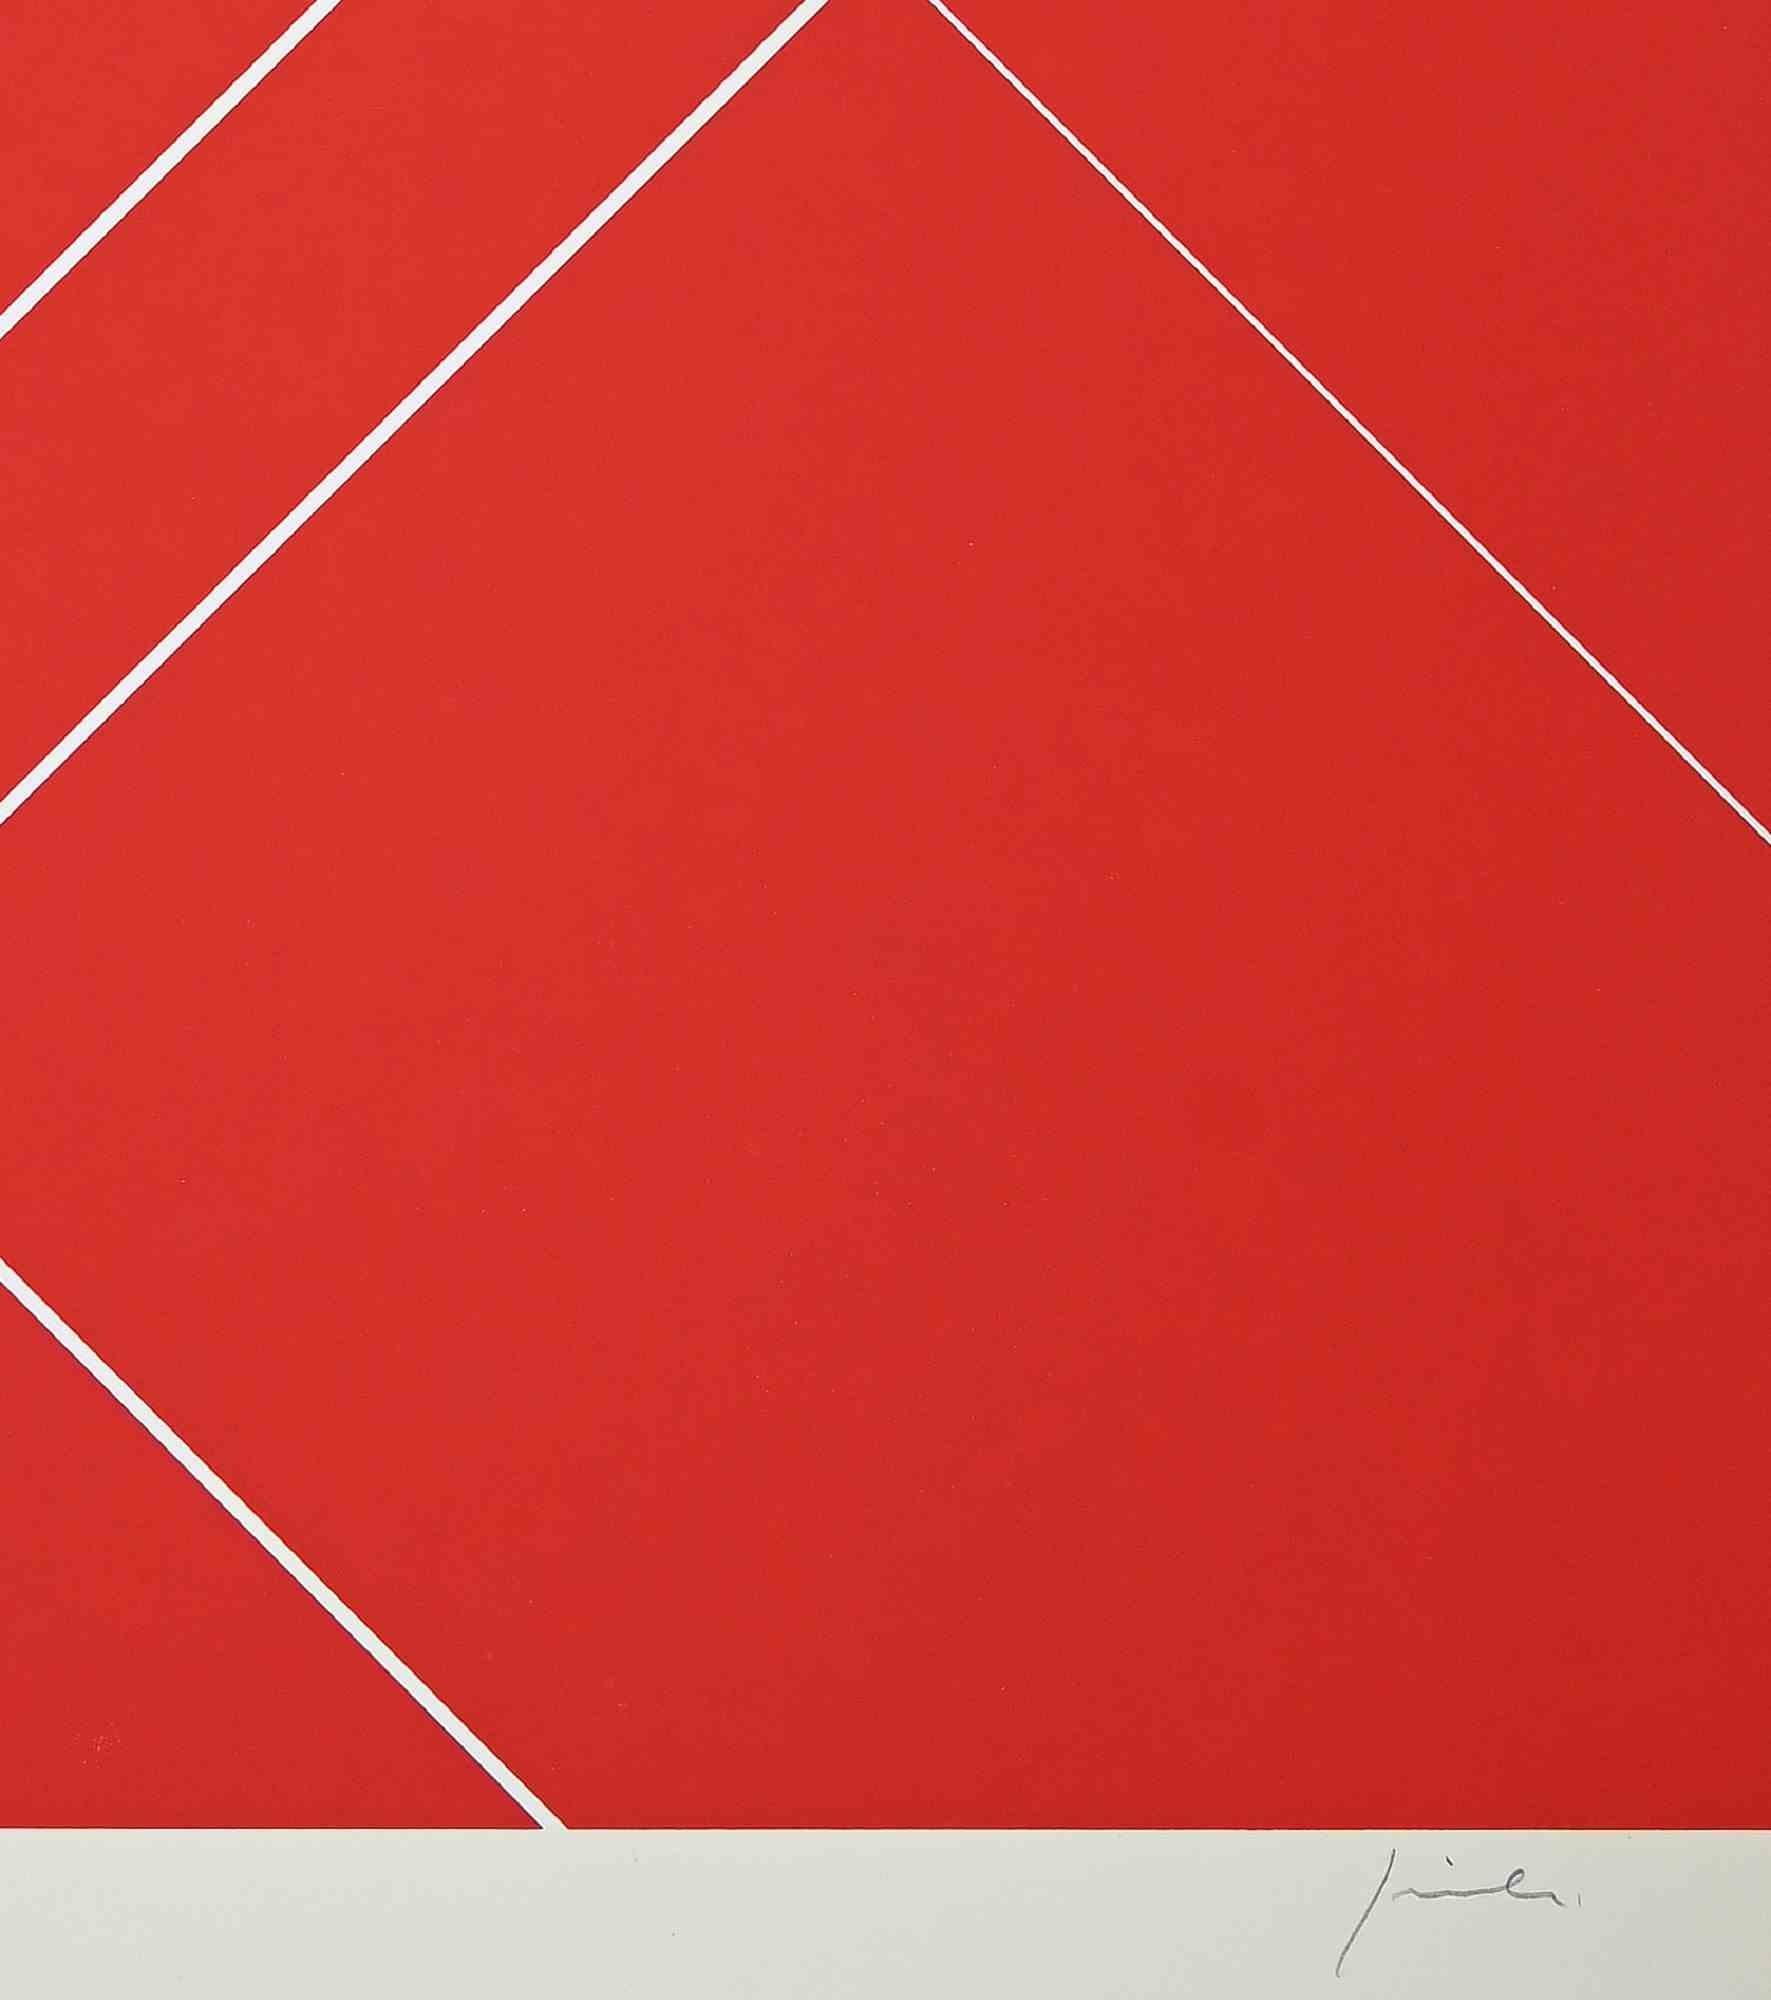 Composition in Red - Original Screen Print by Franco Giuli - 1970s For Sale 1